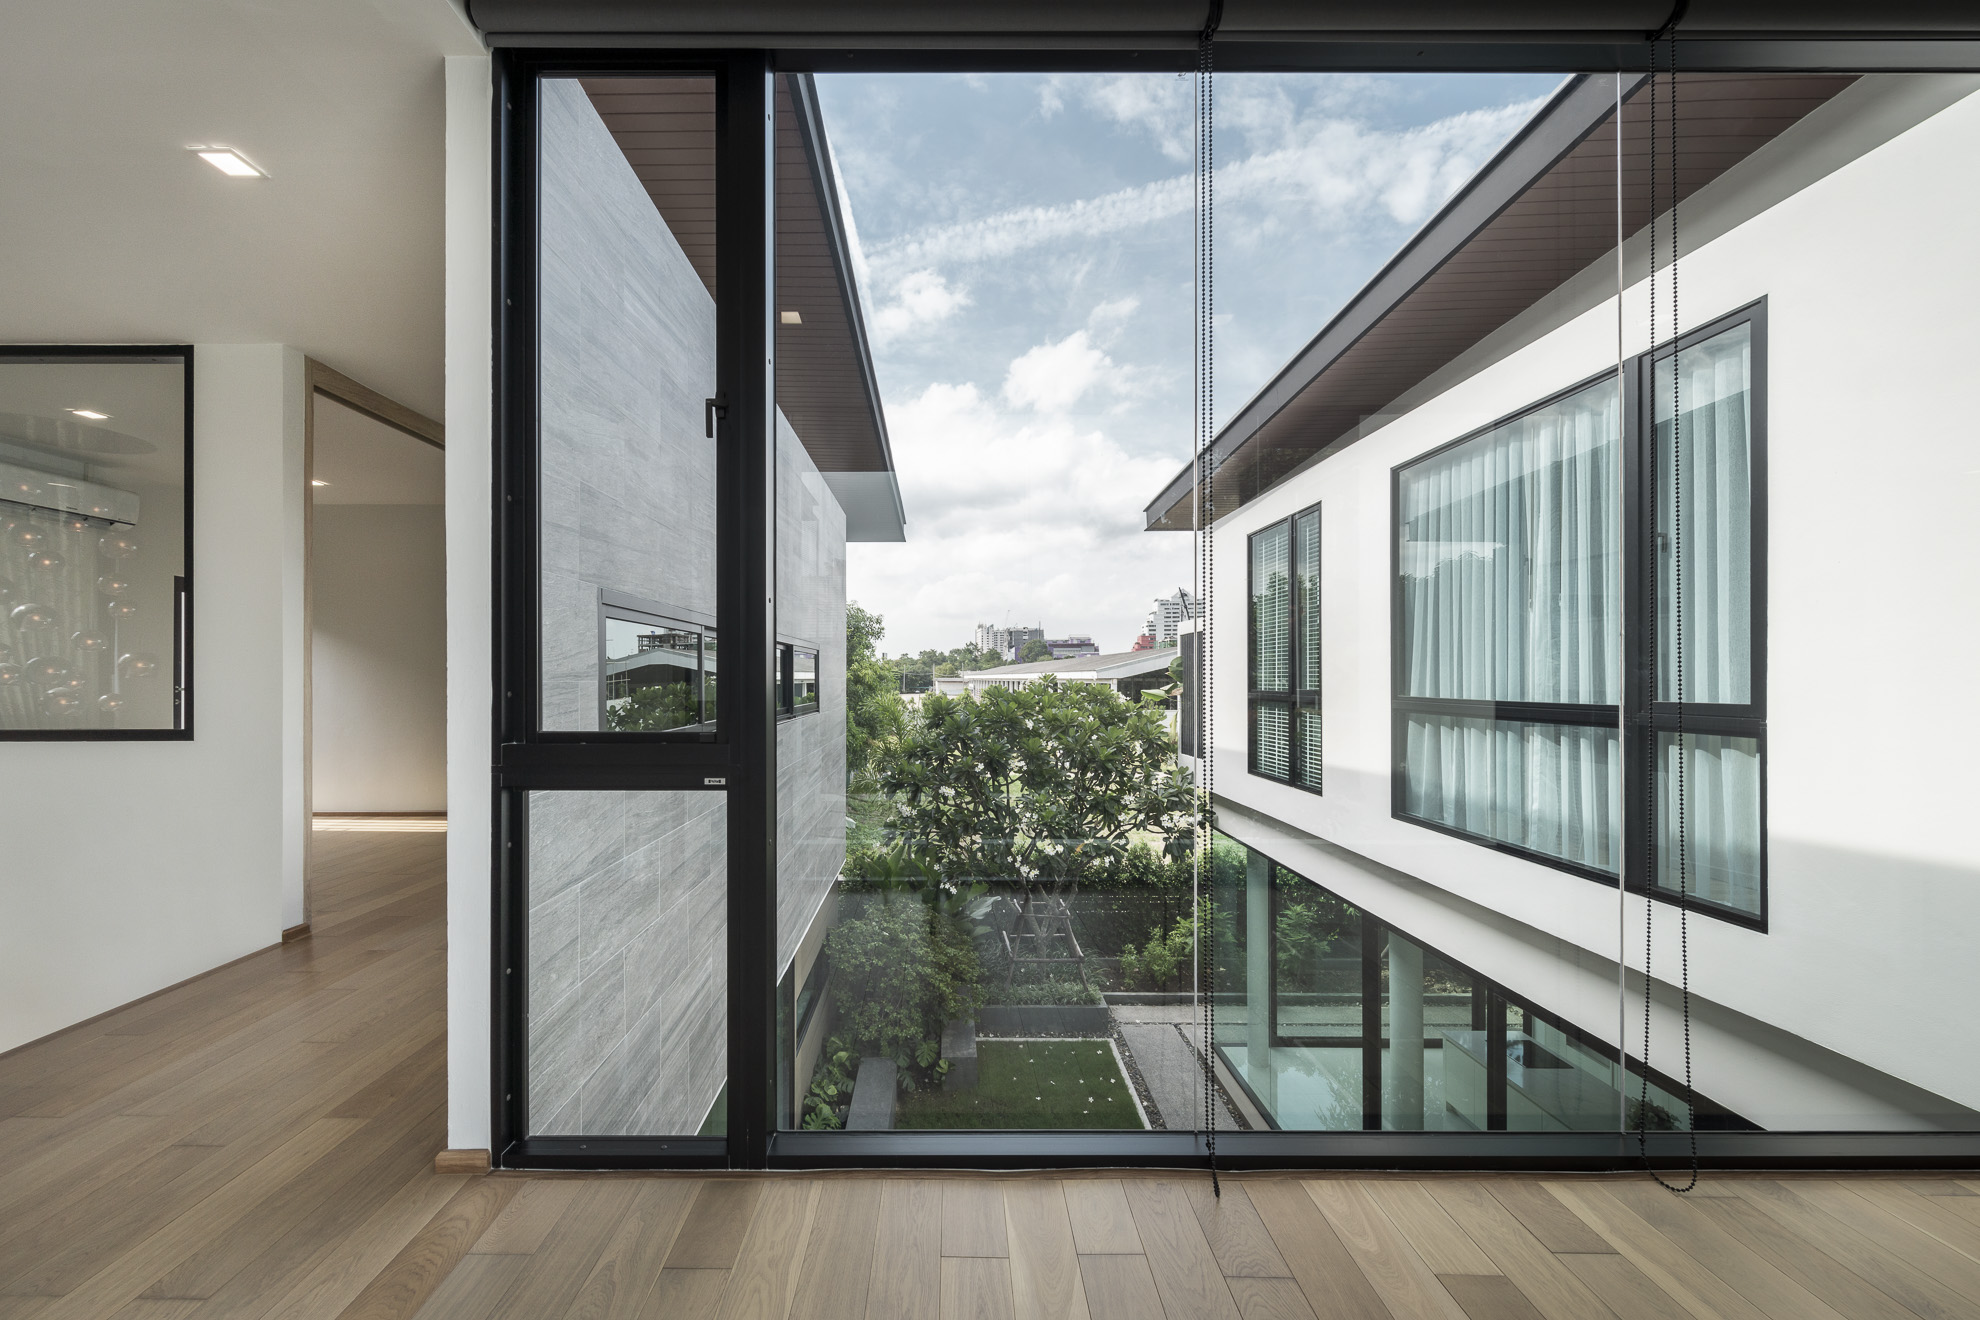 SIRI House by GLA.Design - Sofography | Architectural Photography Studio by Chalermwat Wongchompoo